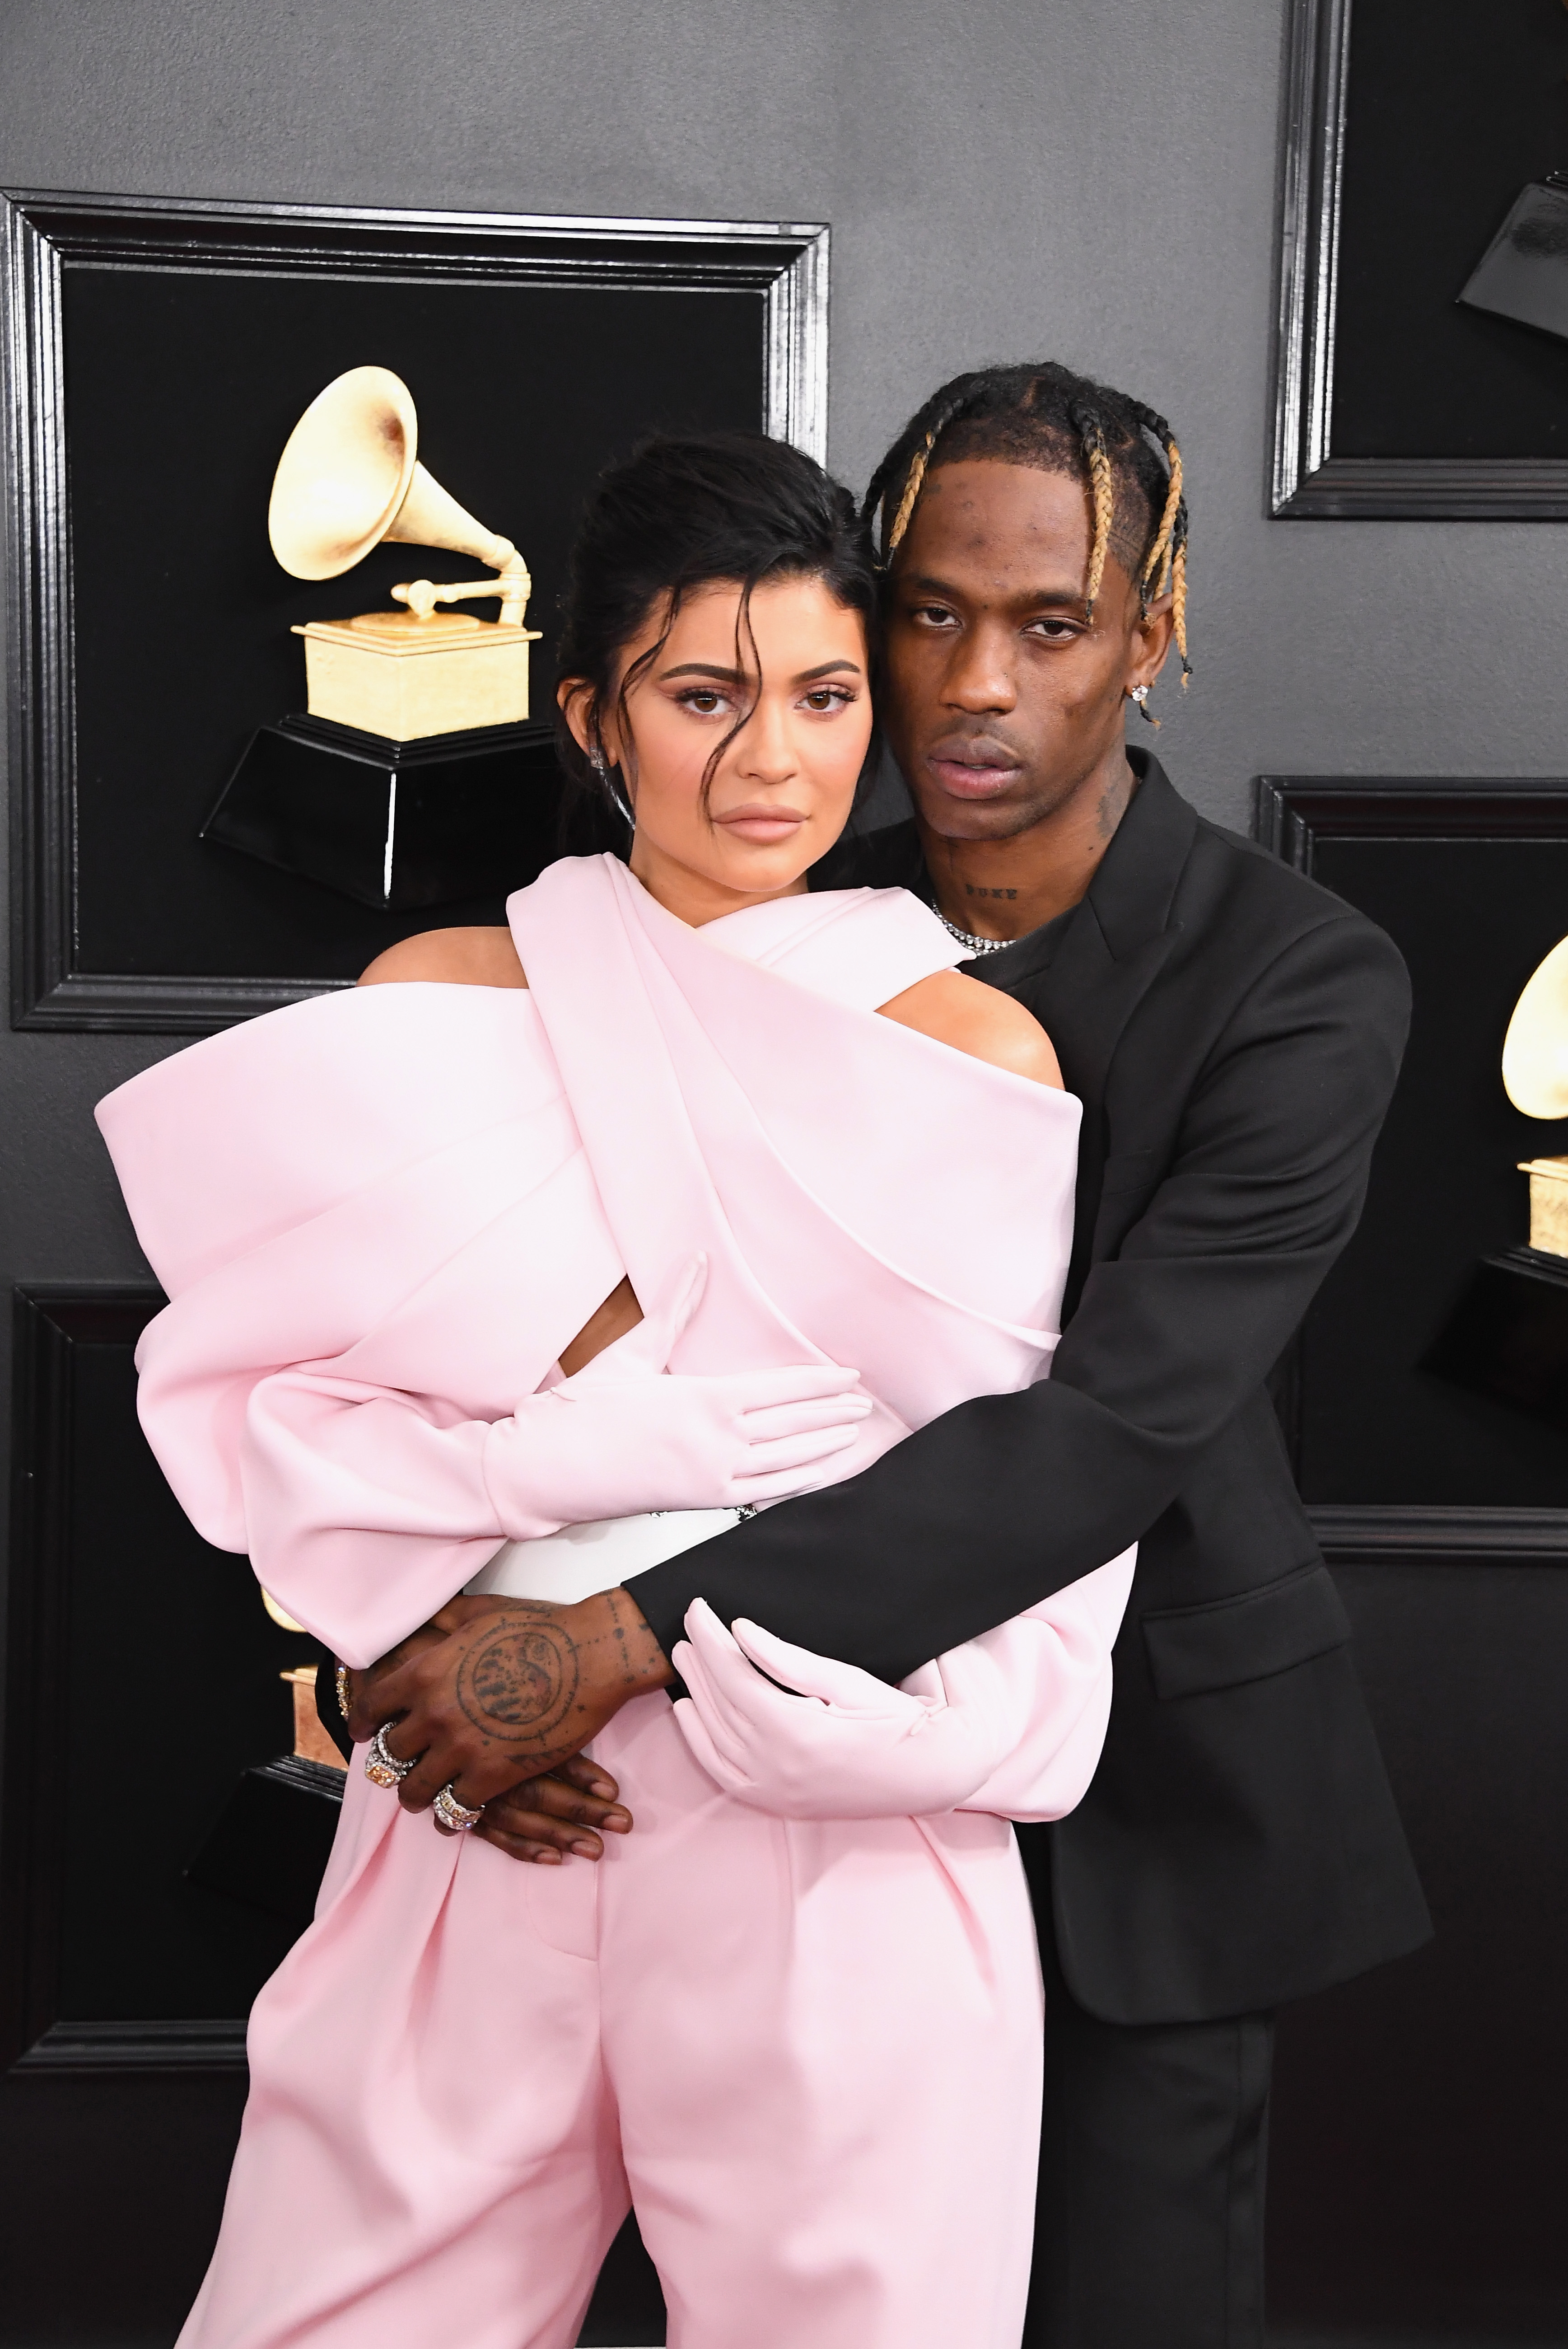 Kylie's ex, Travis Scott, heavily hinted in a recent rap that Ozempic was behind Kylie's weight loss